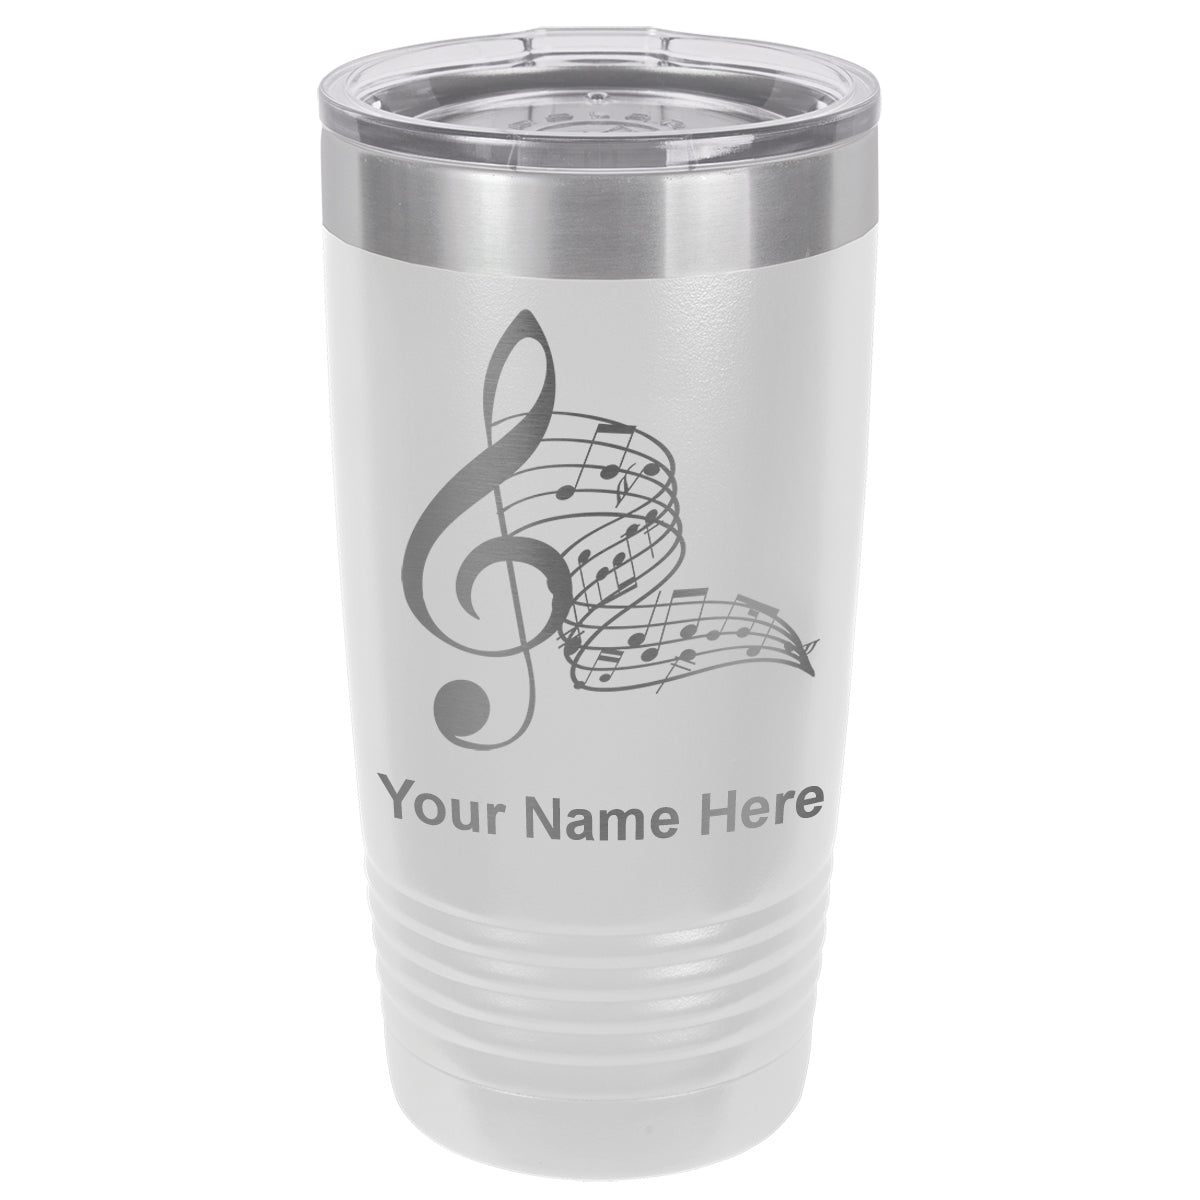 20oz Vacuum Insulated Tumbler Mug, Musical Notes, Personalized Engraving Included